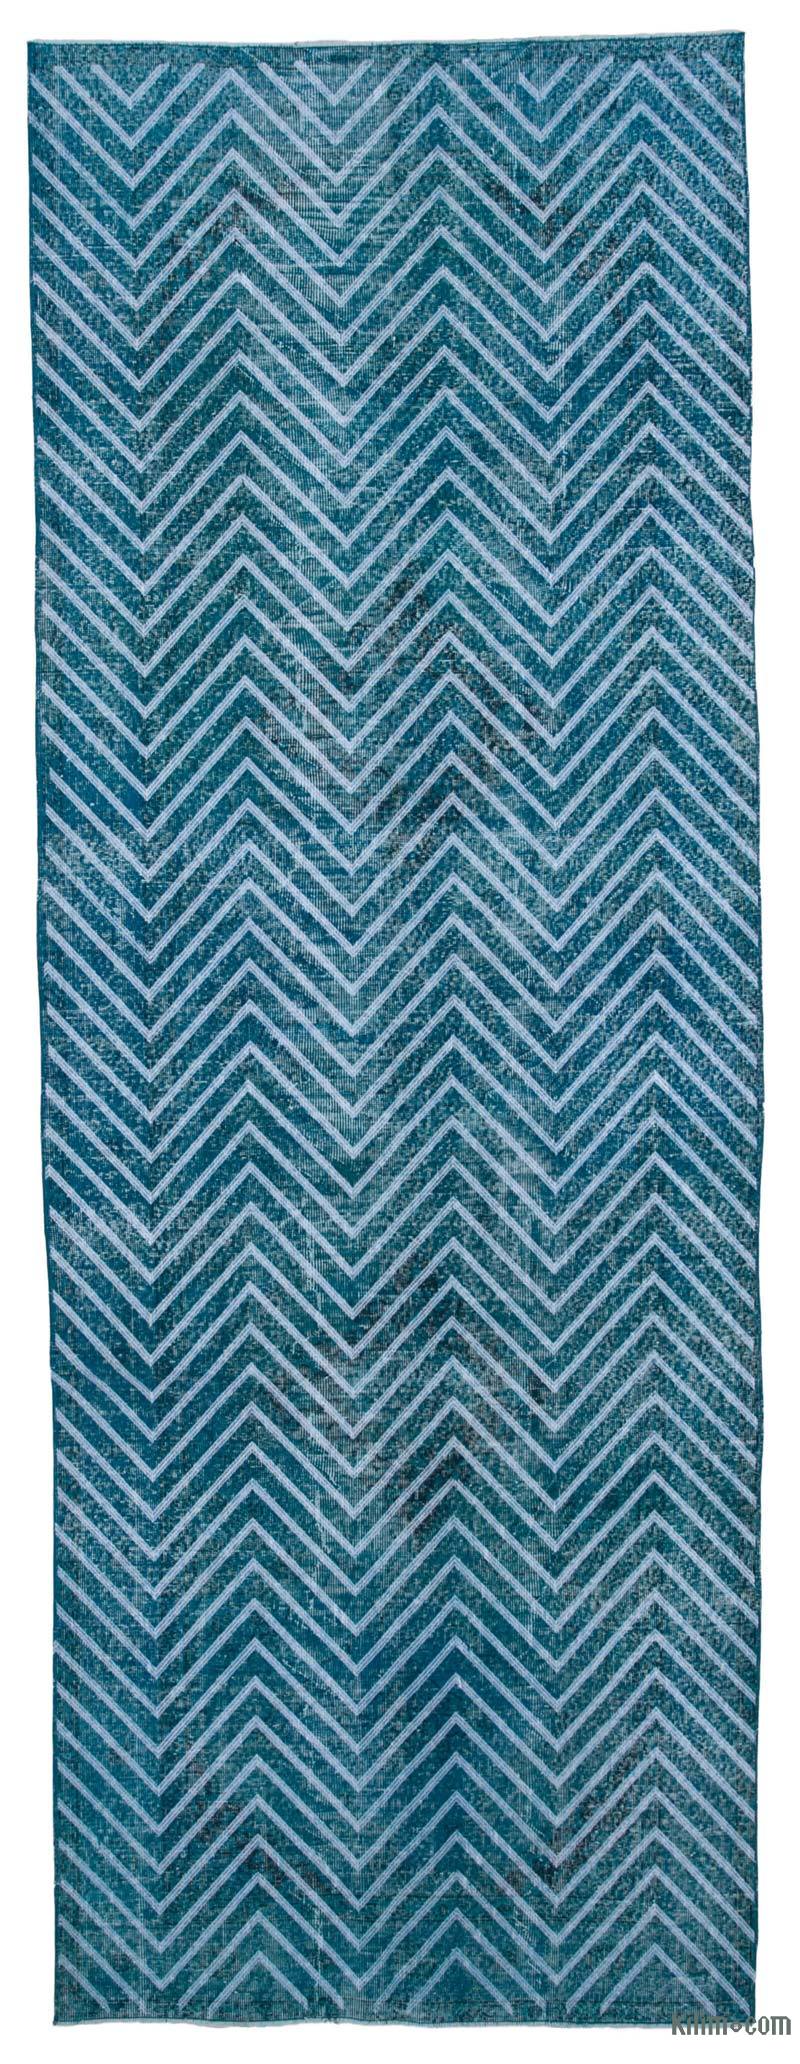 Embroidered Over-dyed Turkish Vintage Runner - 4' 8" x 13' 1" (56" x 157") - K0038640